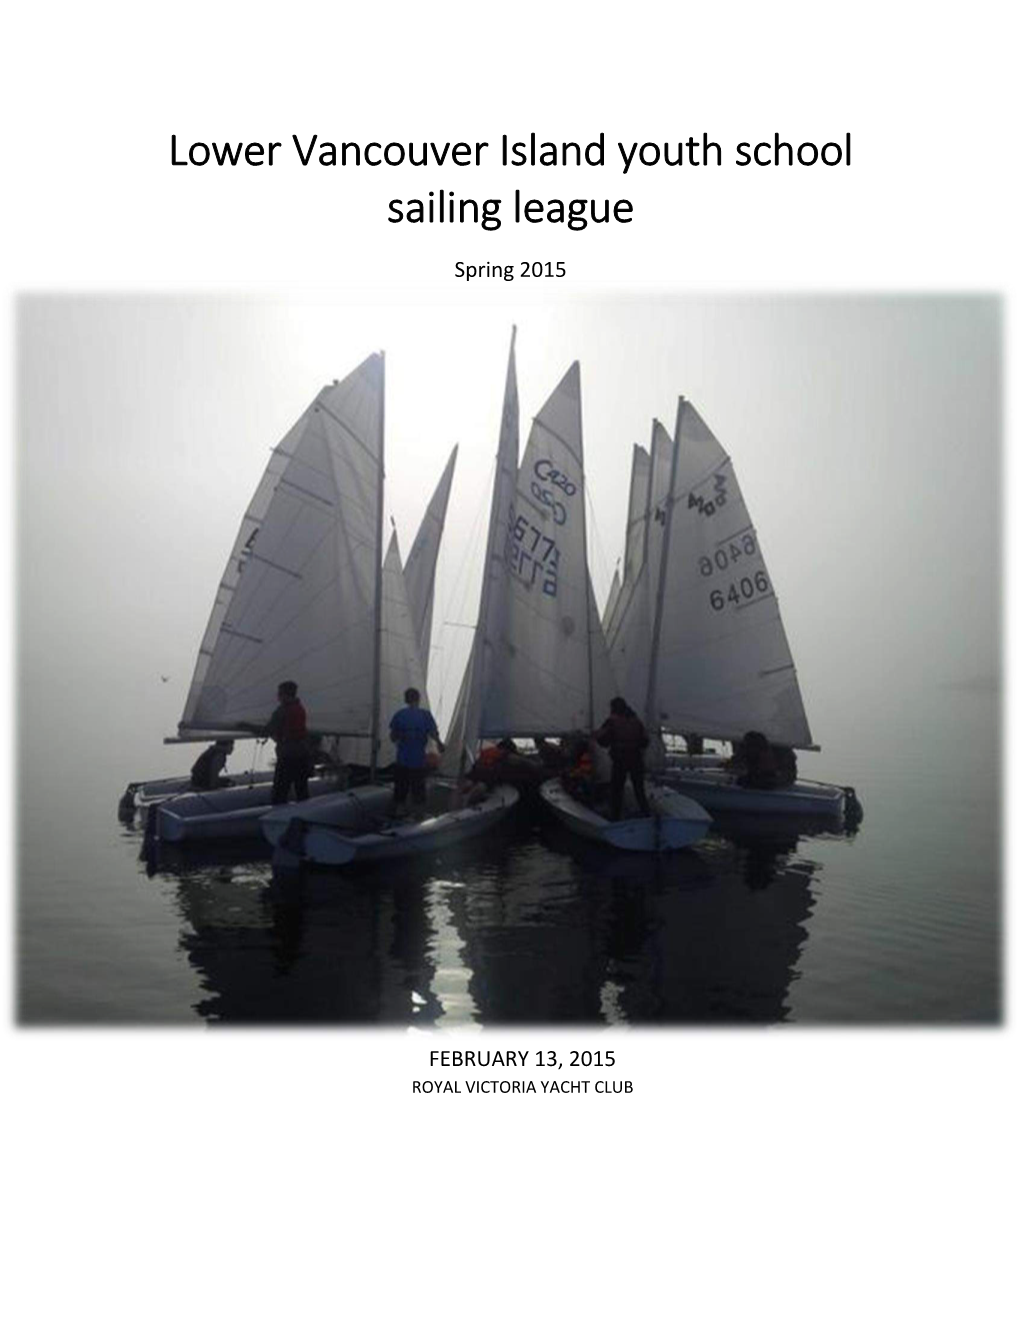 Lower Vancouver Island Youth School Sailing League